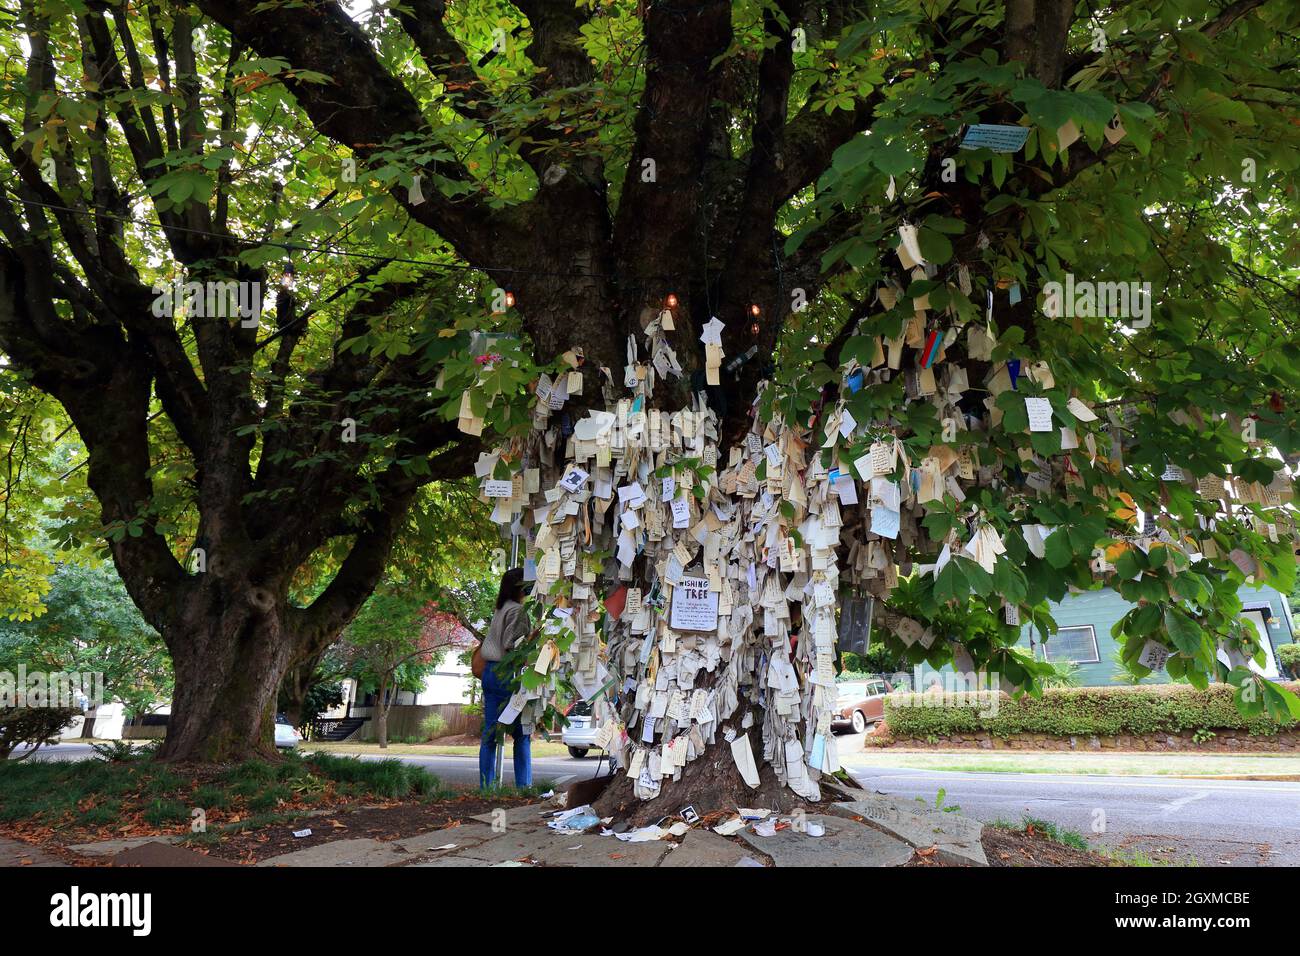 The Wishing Tree, Portland, Oregon. a neighborhood tree filled with hope and wishes located near Irving Park. Stock Photo